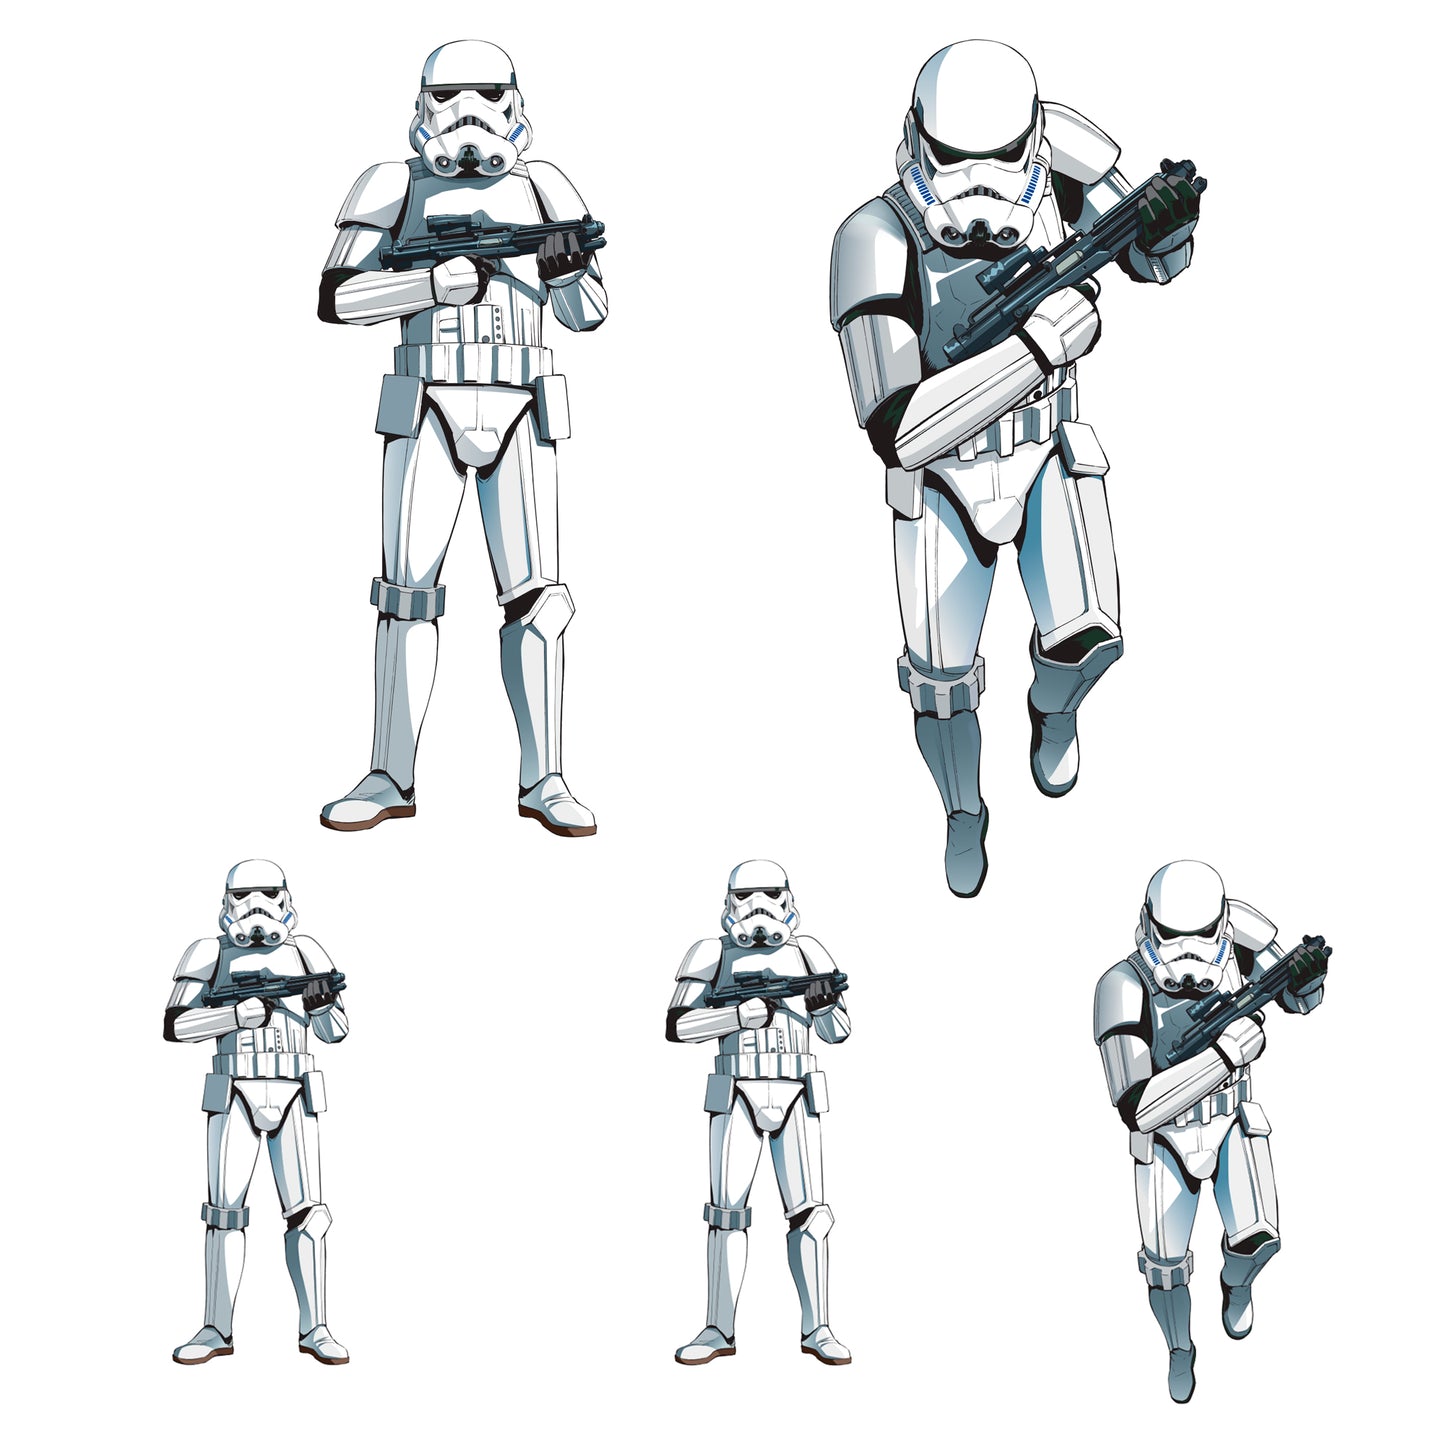 Sheet of 5 -Storm Troopers Line Art Minis        - Officially Licensed Star Wars Removable    Adhesive Decal